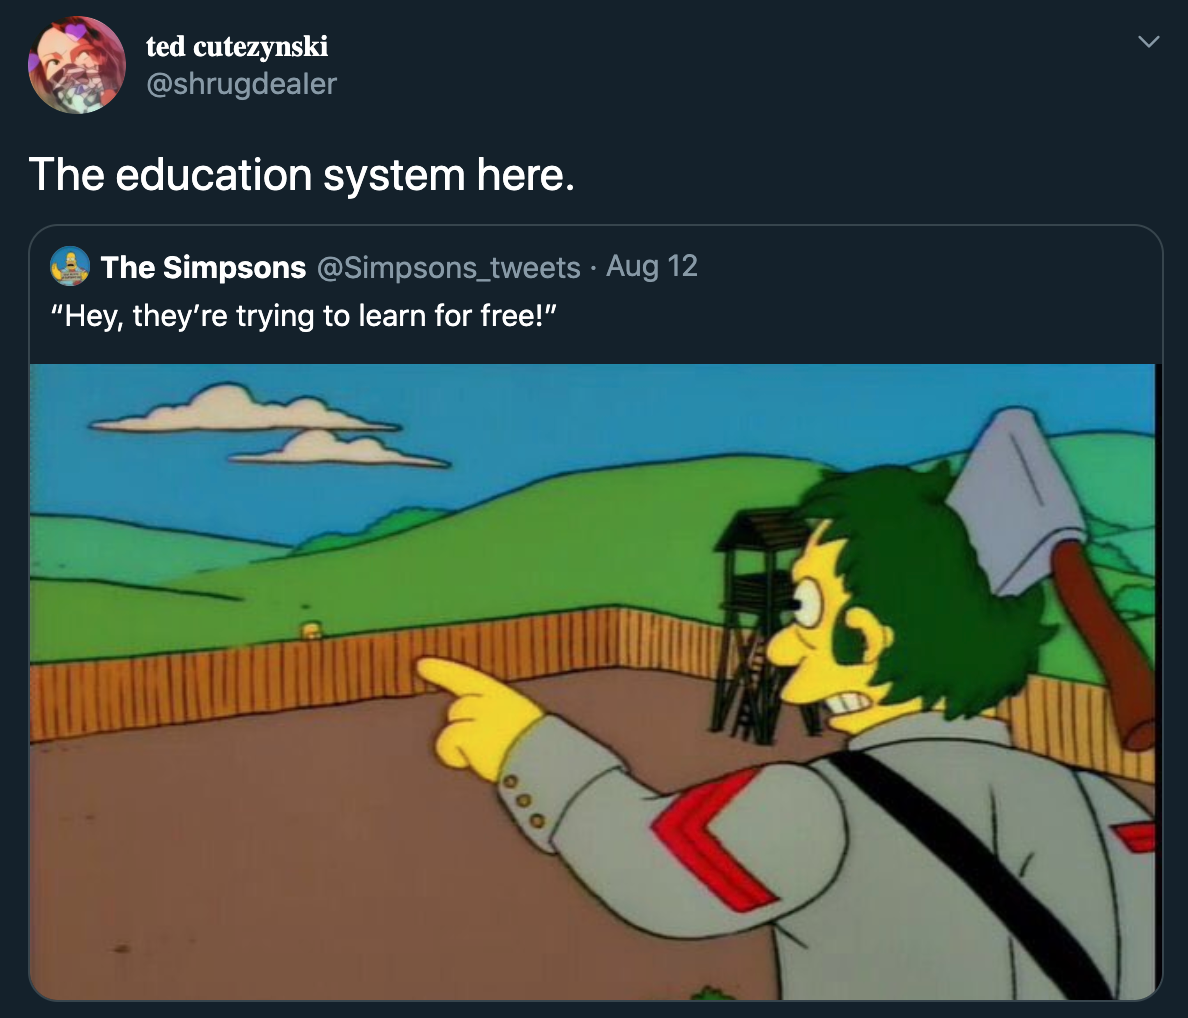 The education system here. - The Simpsons hey they're trying to learn for free!